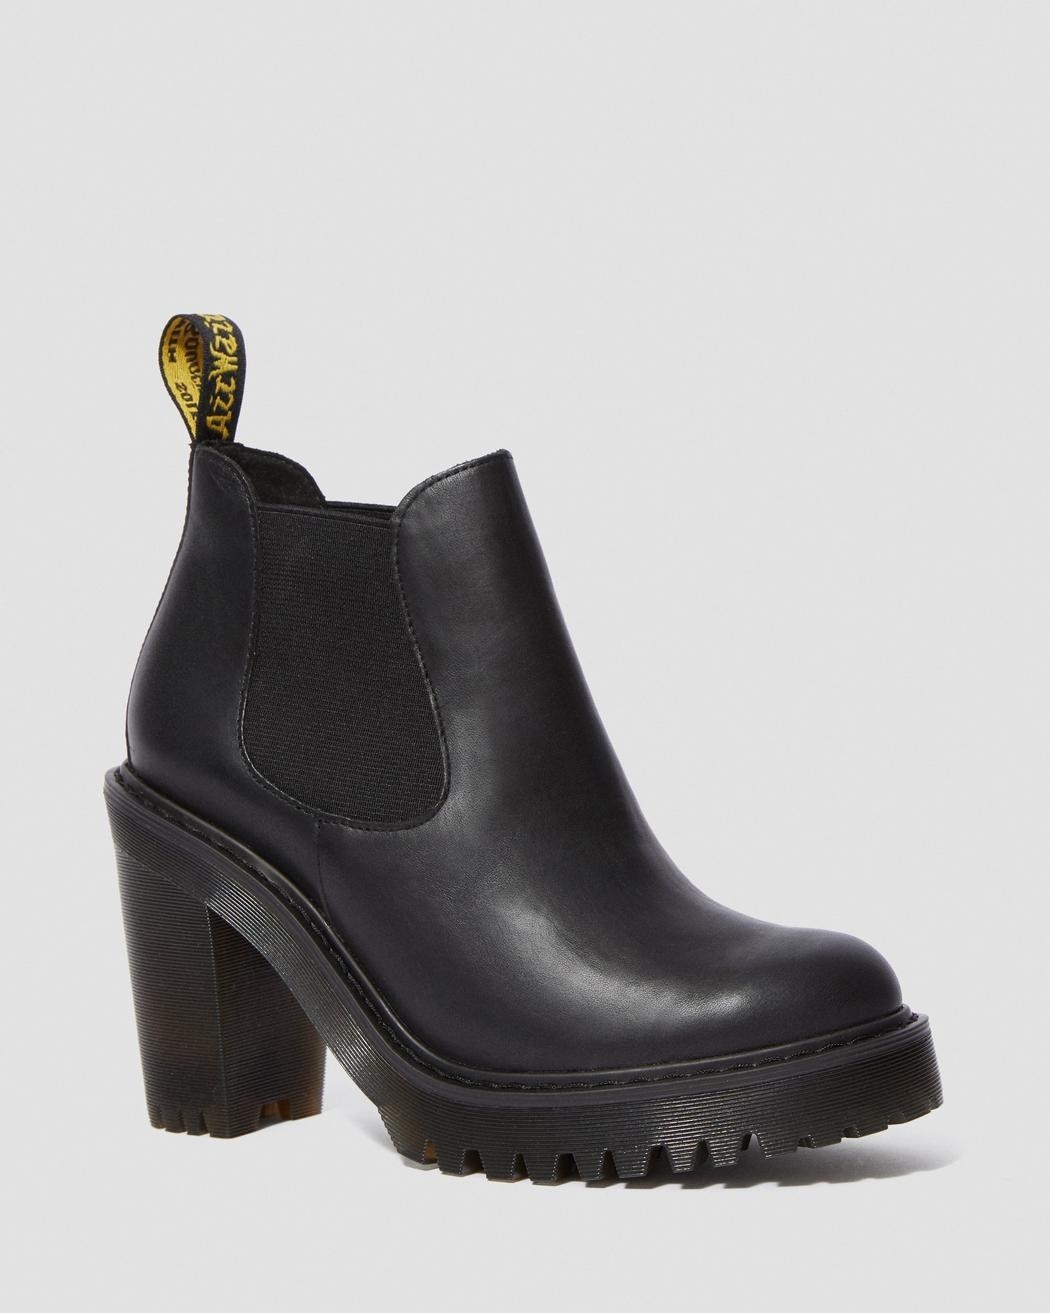 Dr Martens Are Having A Cyber Monday 